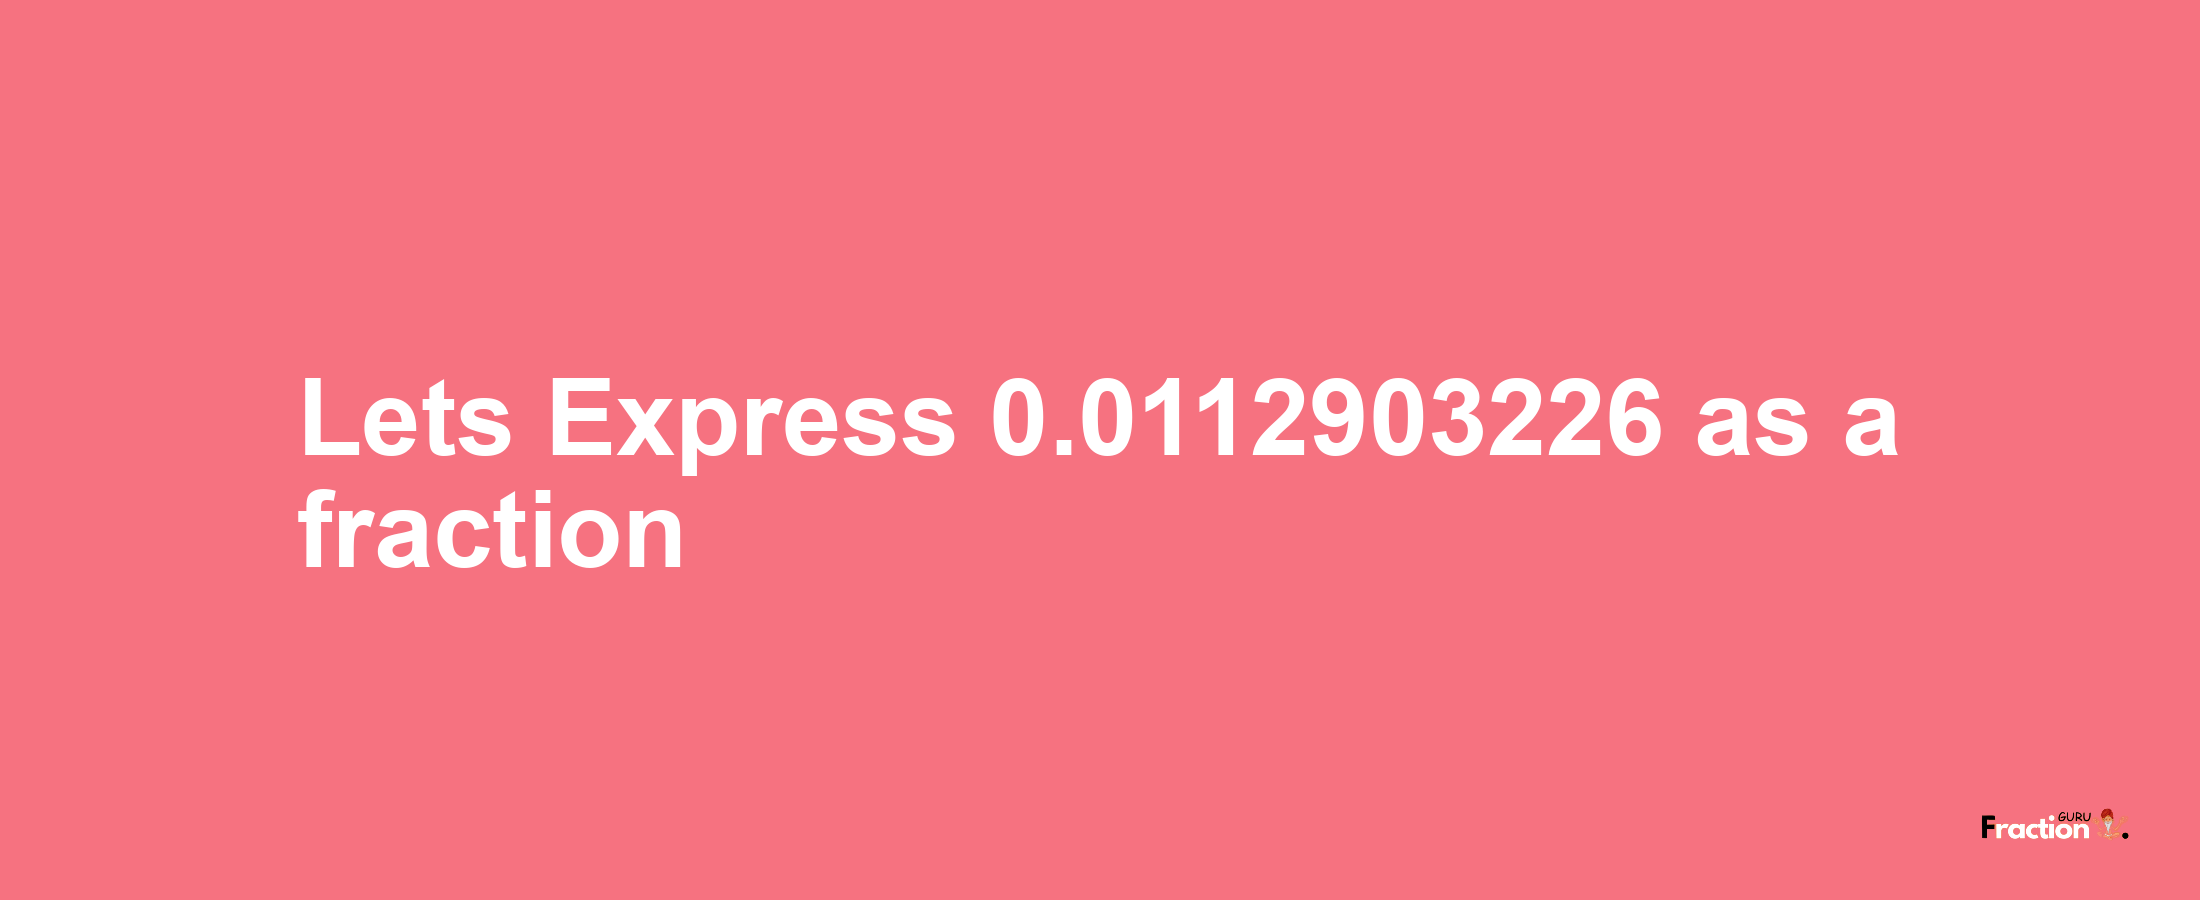 Lets Express 0.0112903226 as afraction